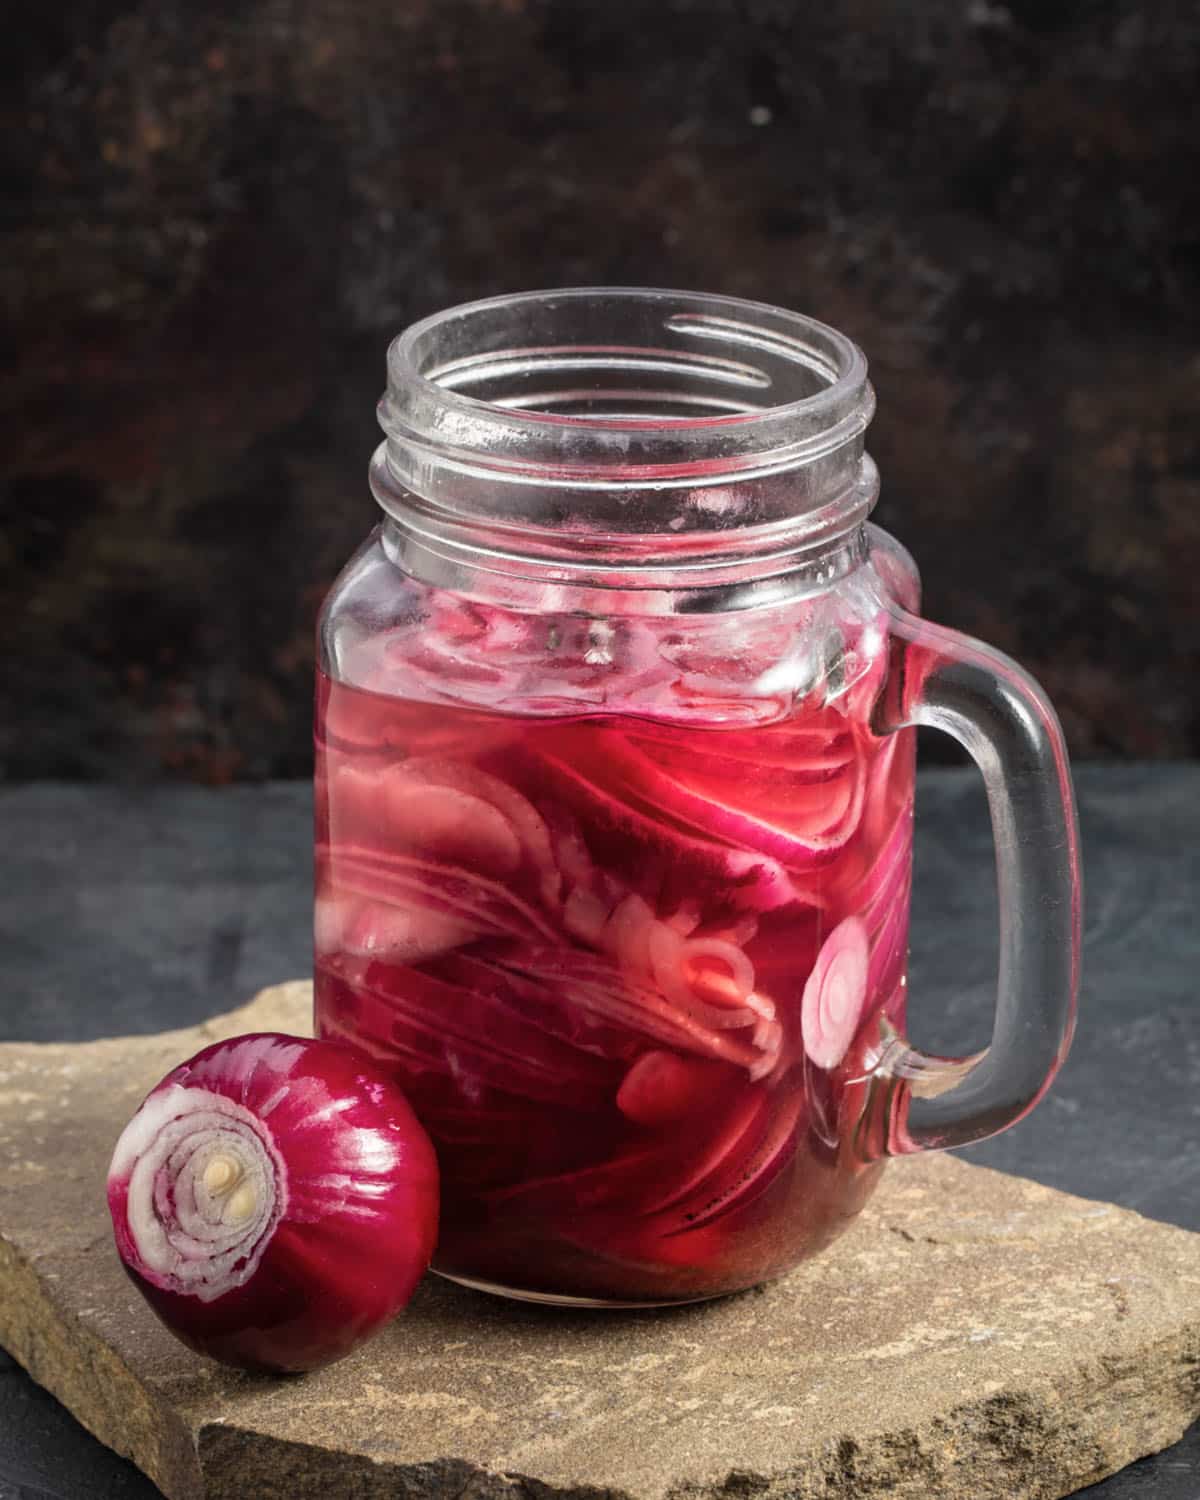 For homemade quick pickled onions, store them in a clean, sterilized jar in the fridge for up to 3 weeks.